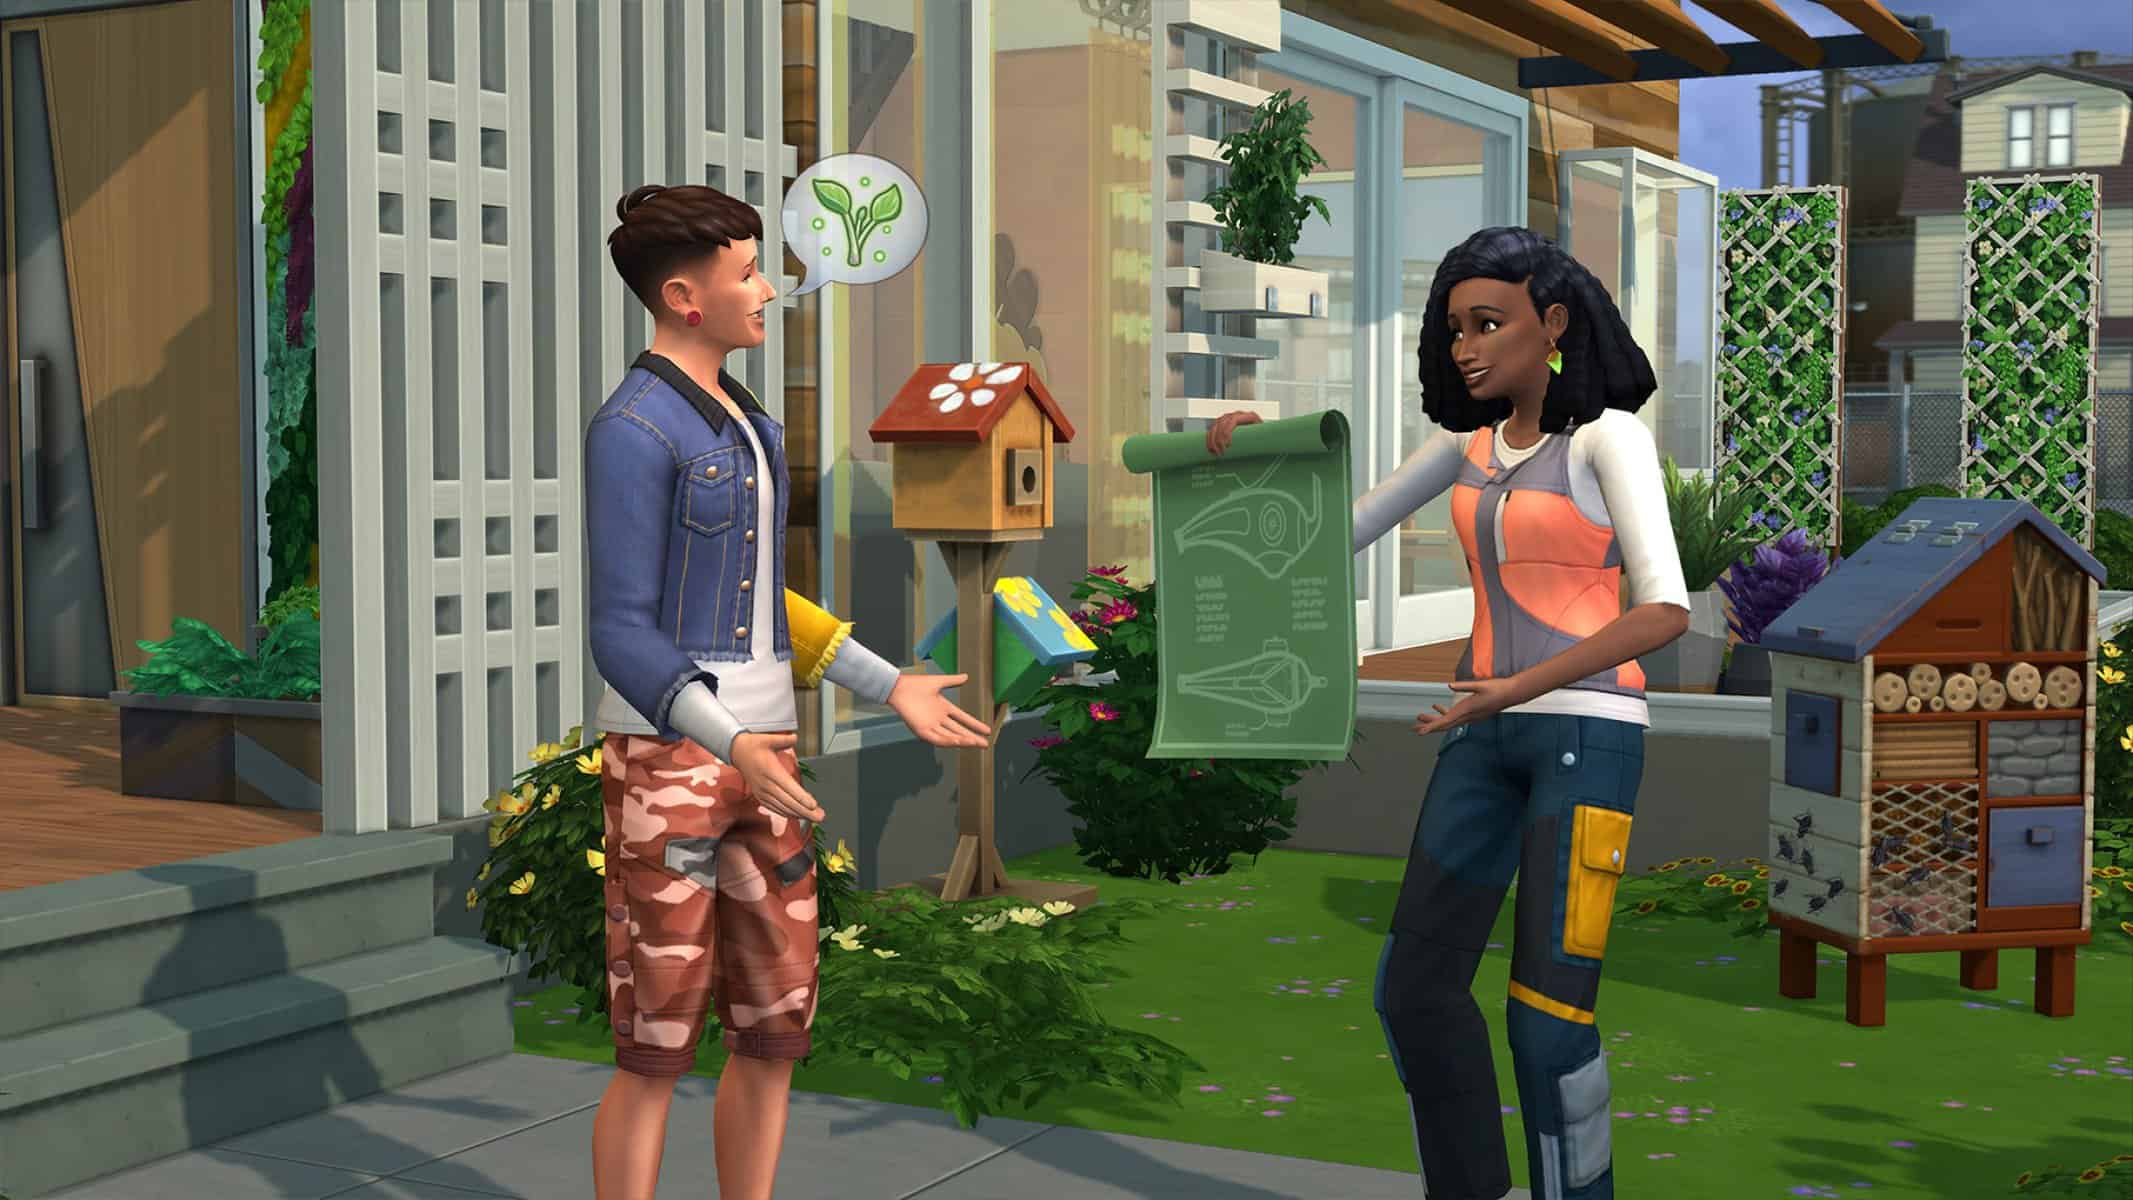 The Sims 4 Expansion Packs - Every Expansion Explained